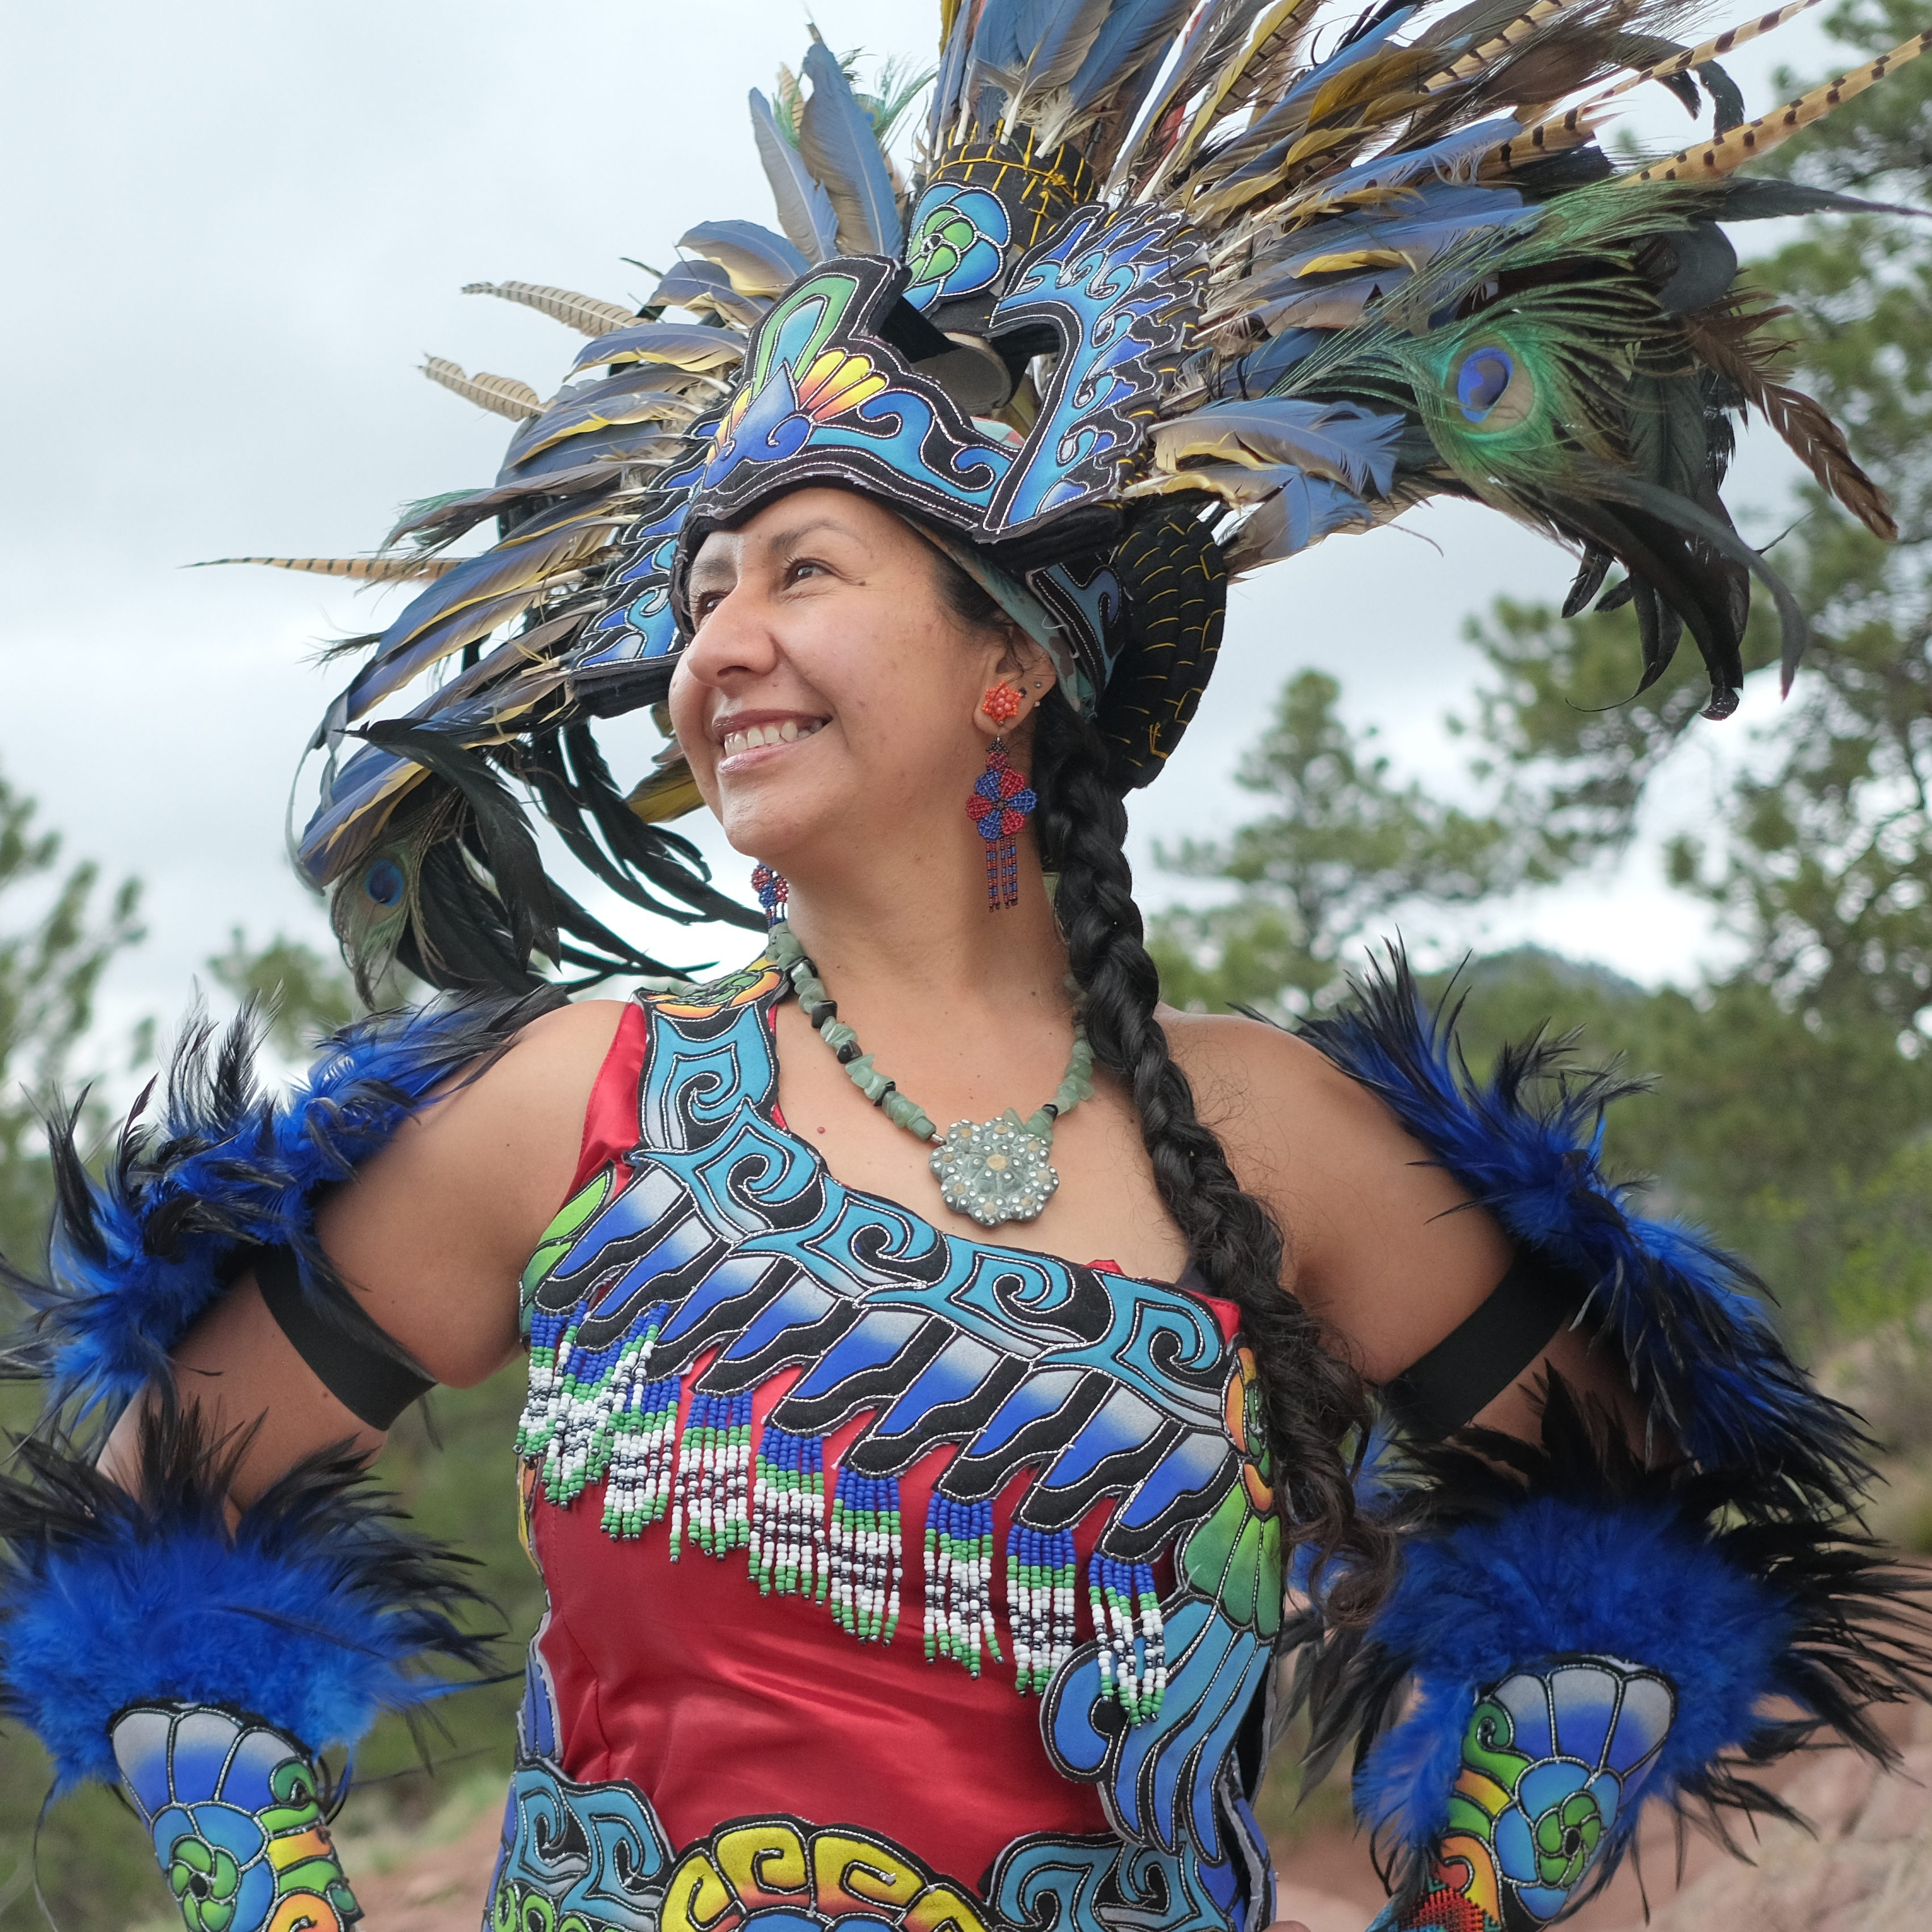 Andrea smiling and looking into the distance wearing bright Azteca dance regalia and abright feather headpiece